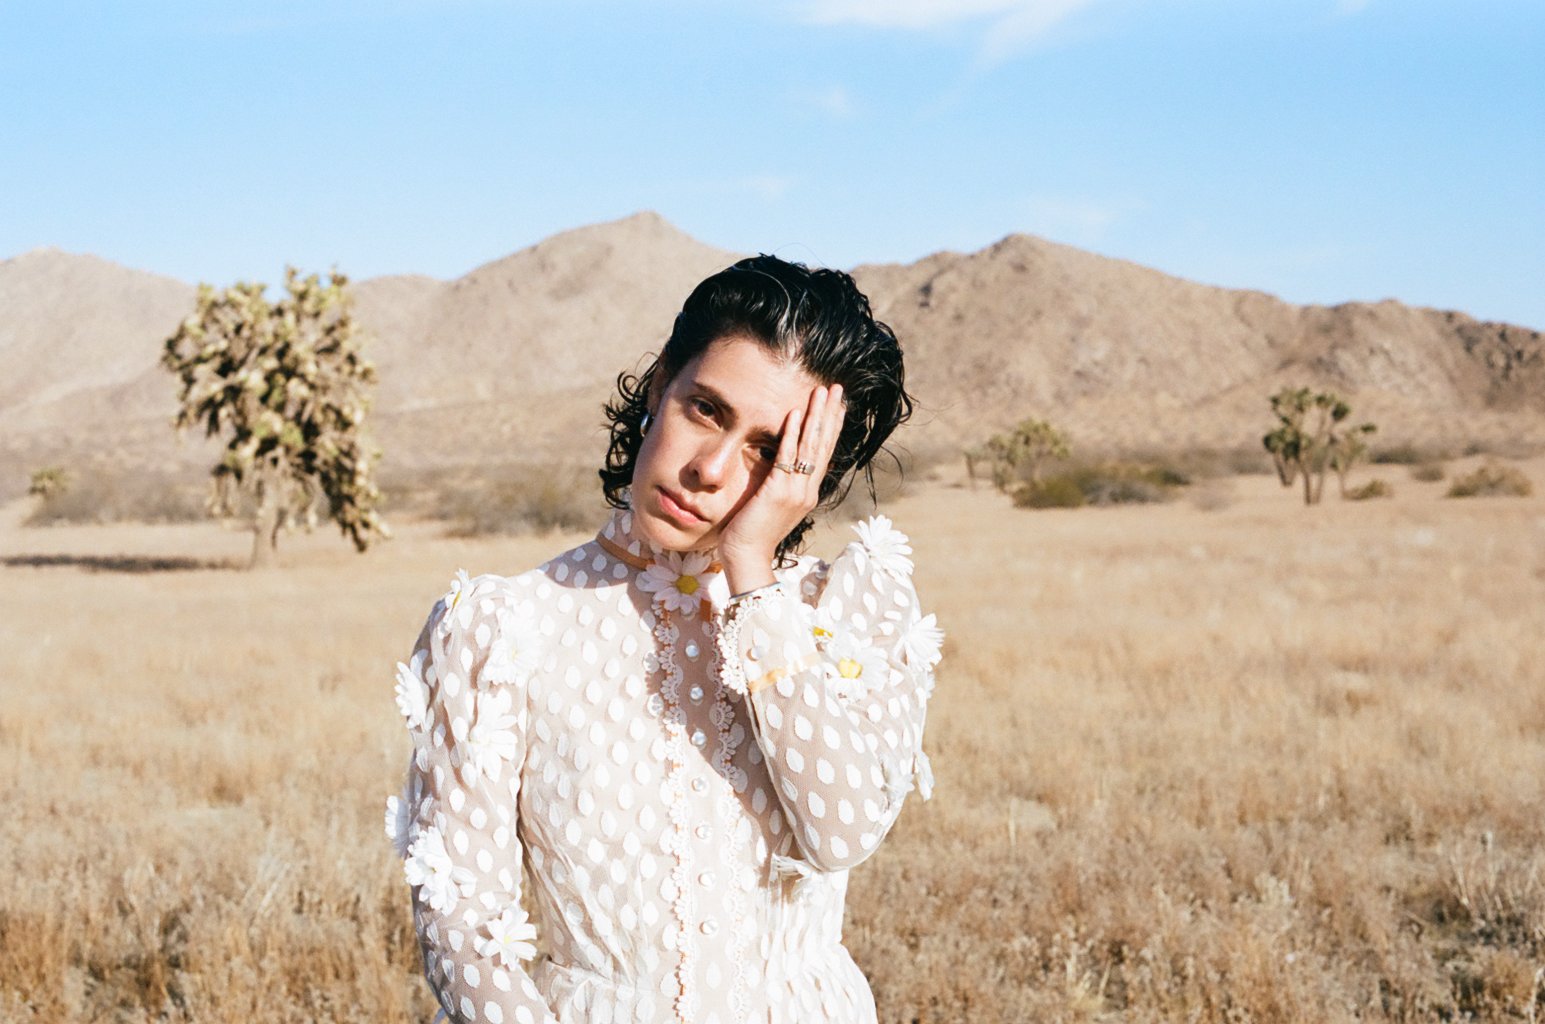 Roberta Colindrez, a Latinx woman poses in a prairie setting, with mountains and desert scrub plants and succulents behind her. She's wearing an old-fashioned white lace dress covered in white teardrop shapes and frilly buttons down the front, and playfully cradling hear face in one hand. She has shoulder length, slightly curly dark hair.